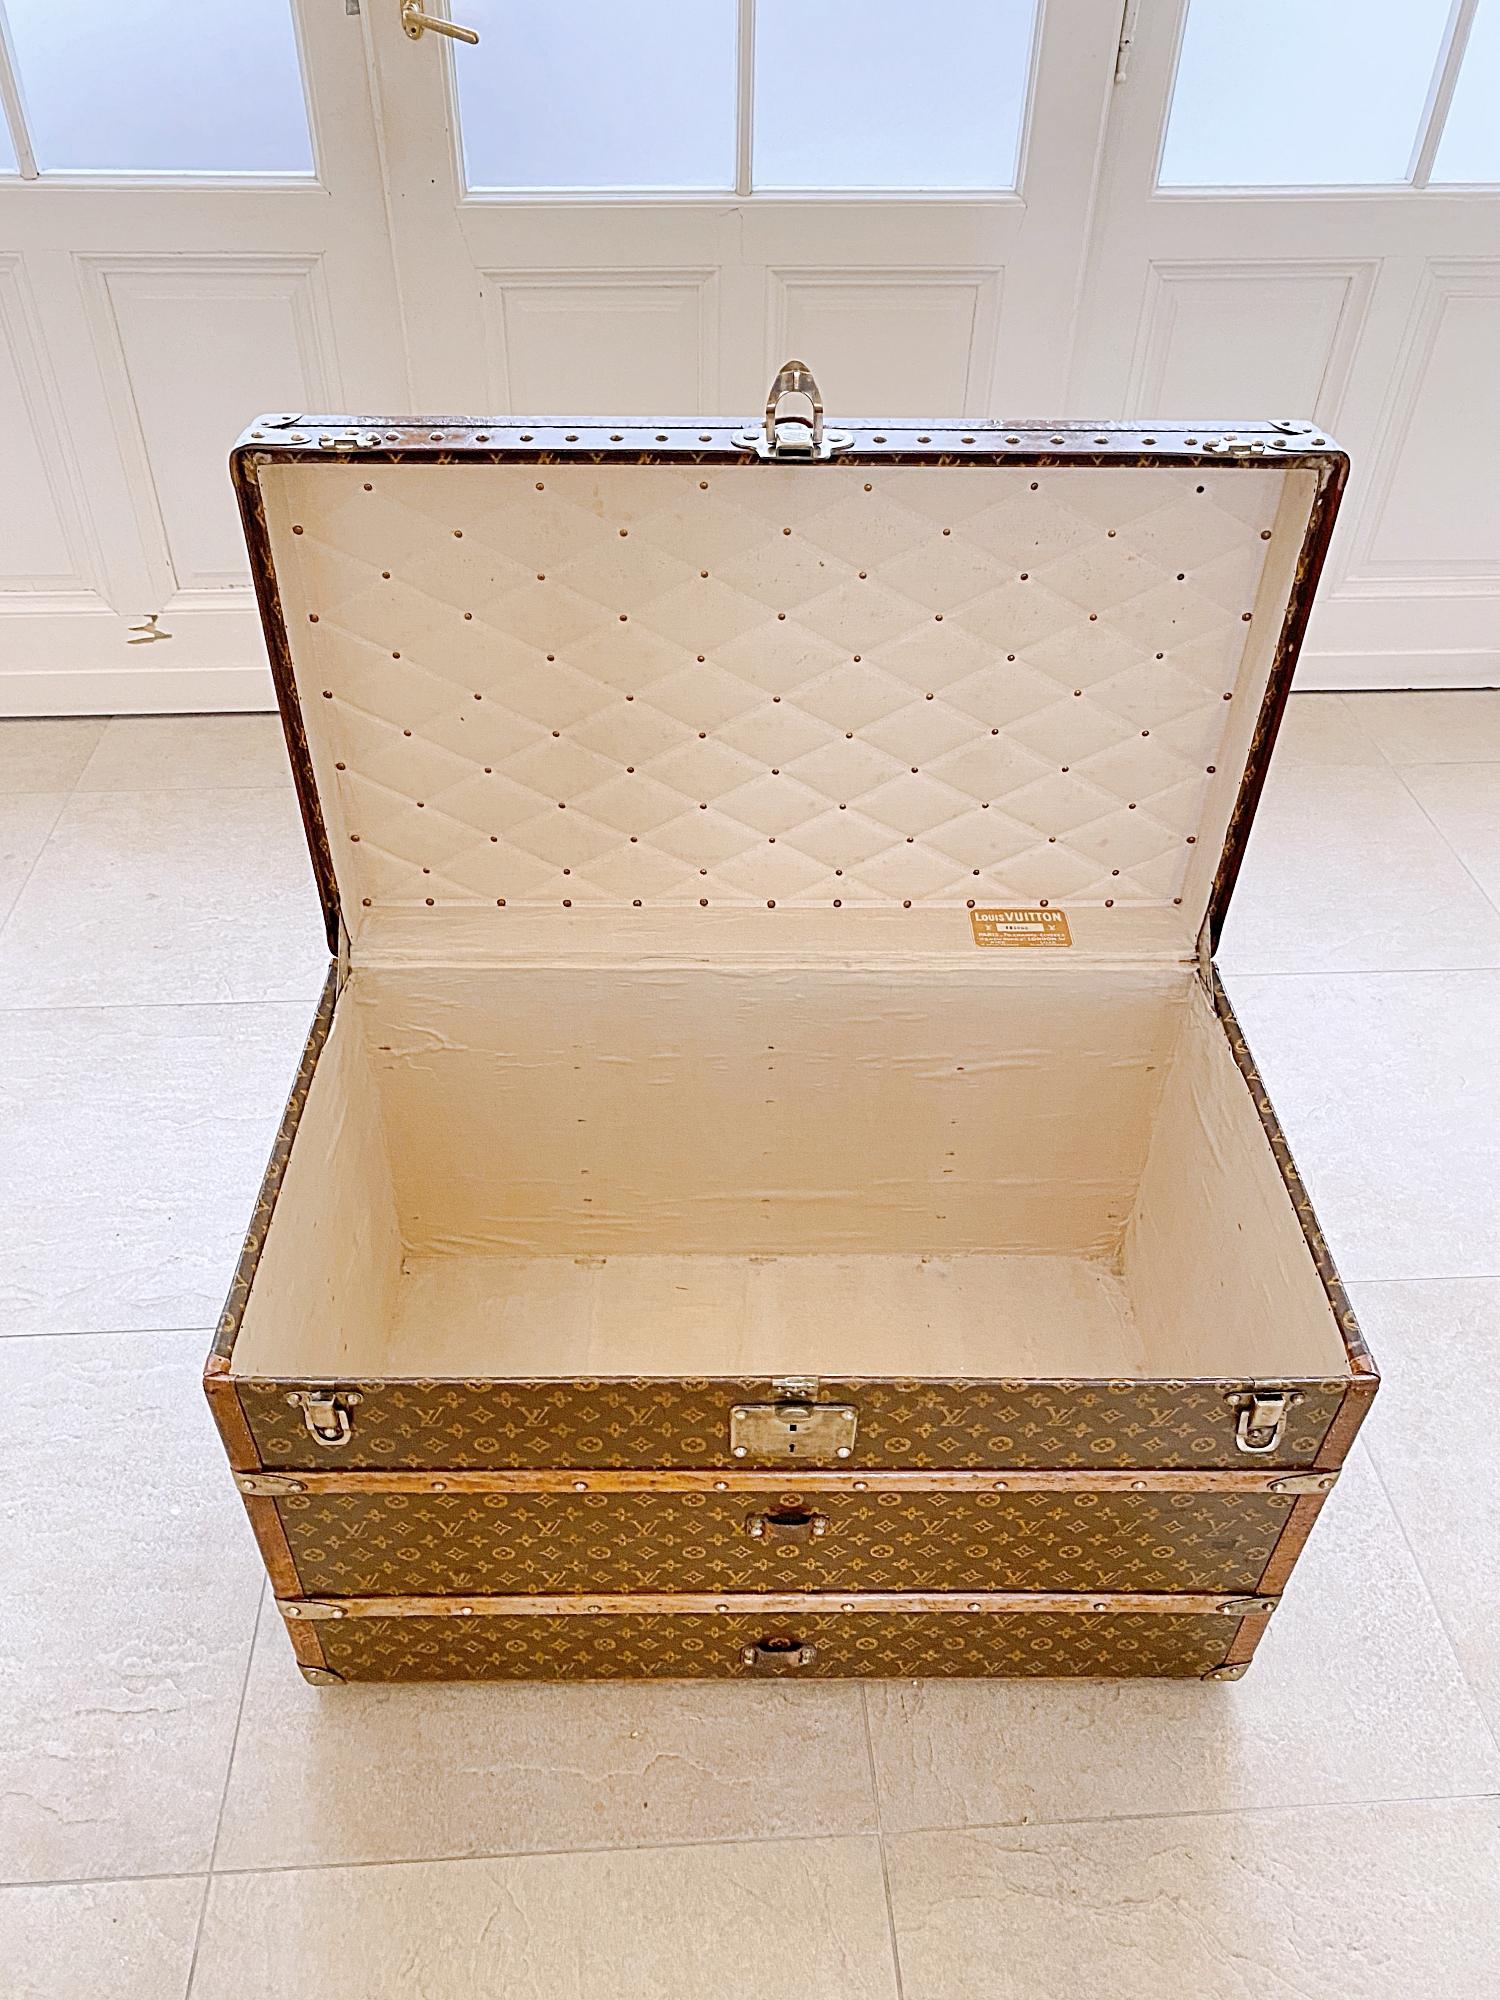 Hand-Crafted Louis Vuitton Trunk from High Nobility House of Thurn & Taxis, 1910s, France